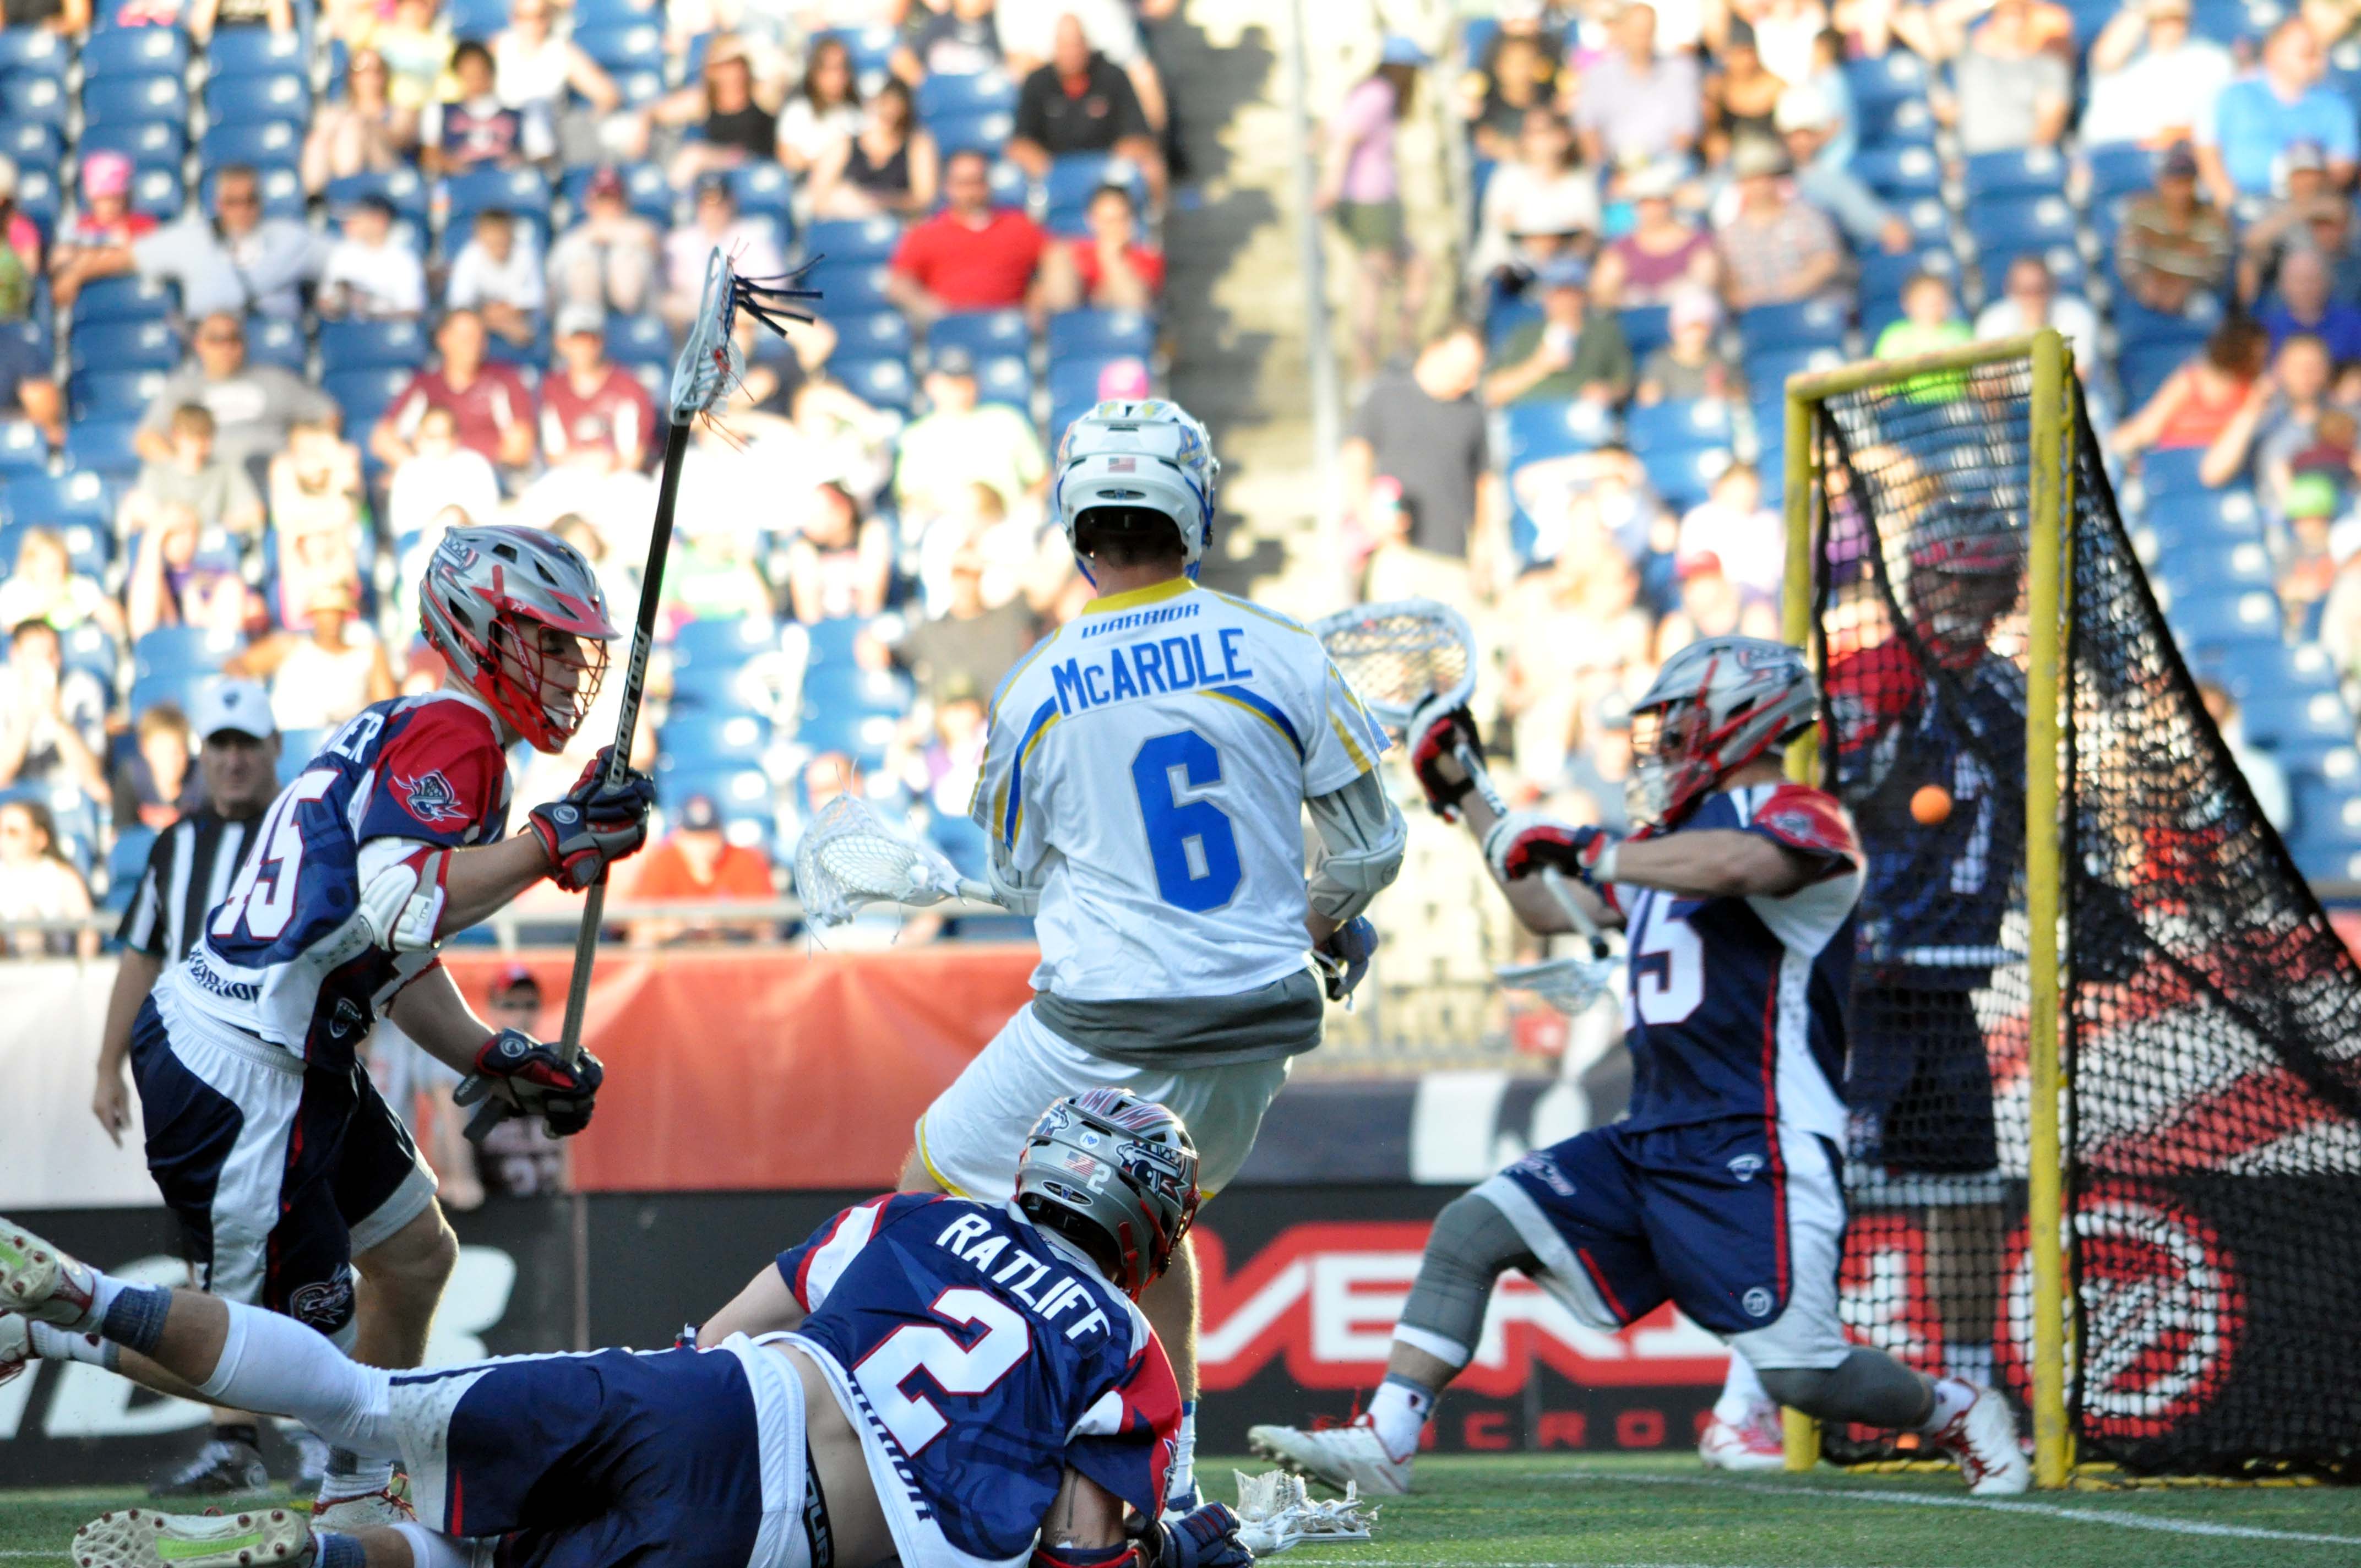 Final Roster Announced for 2015 MLL All-Star Game – In Lacrosse We Trust